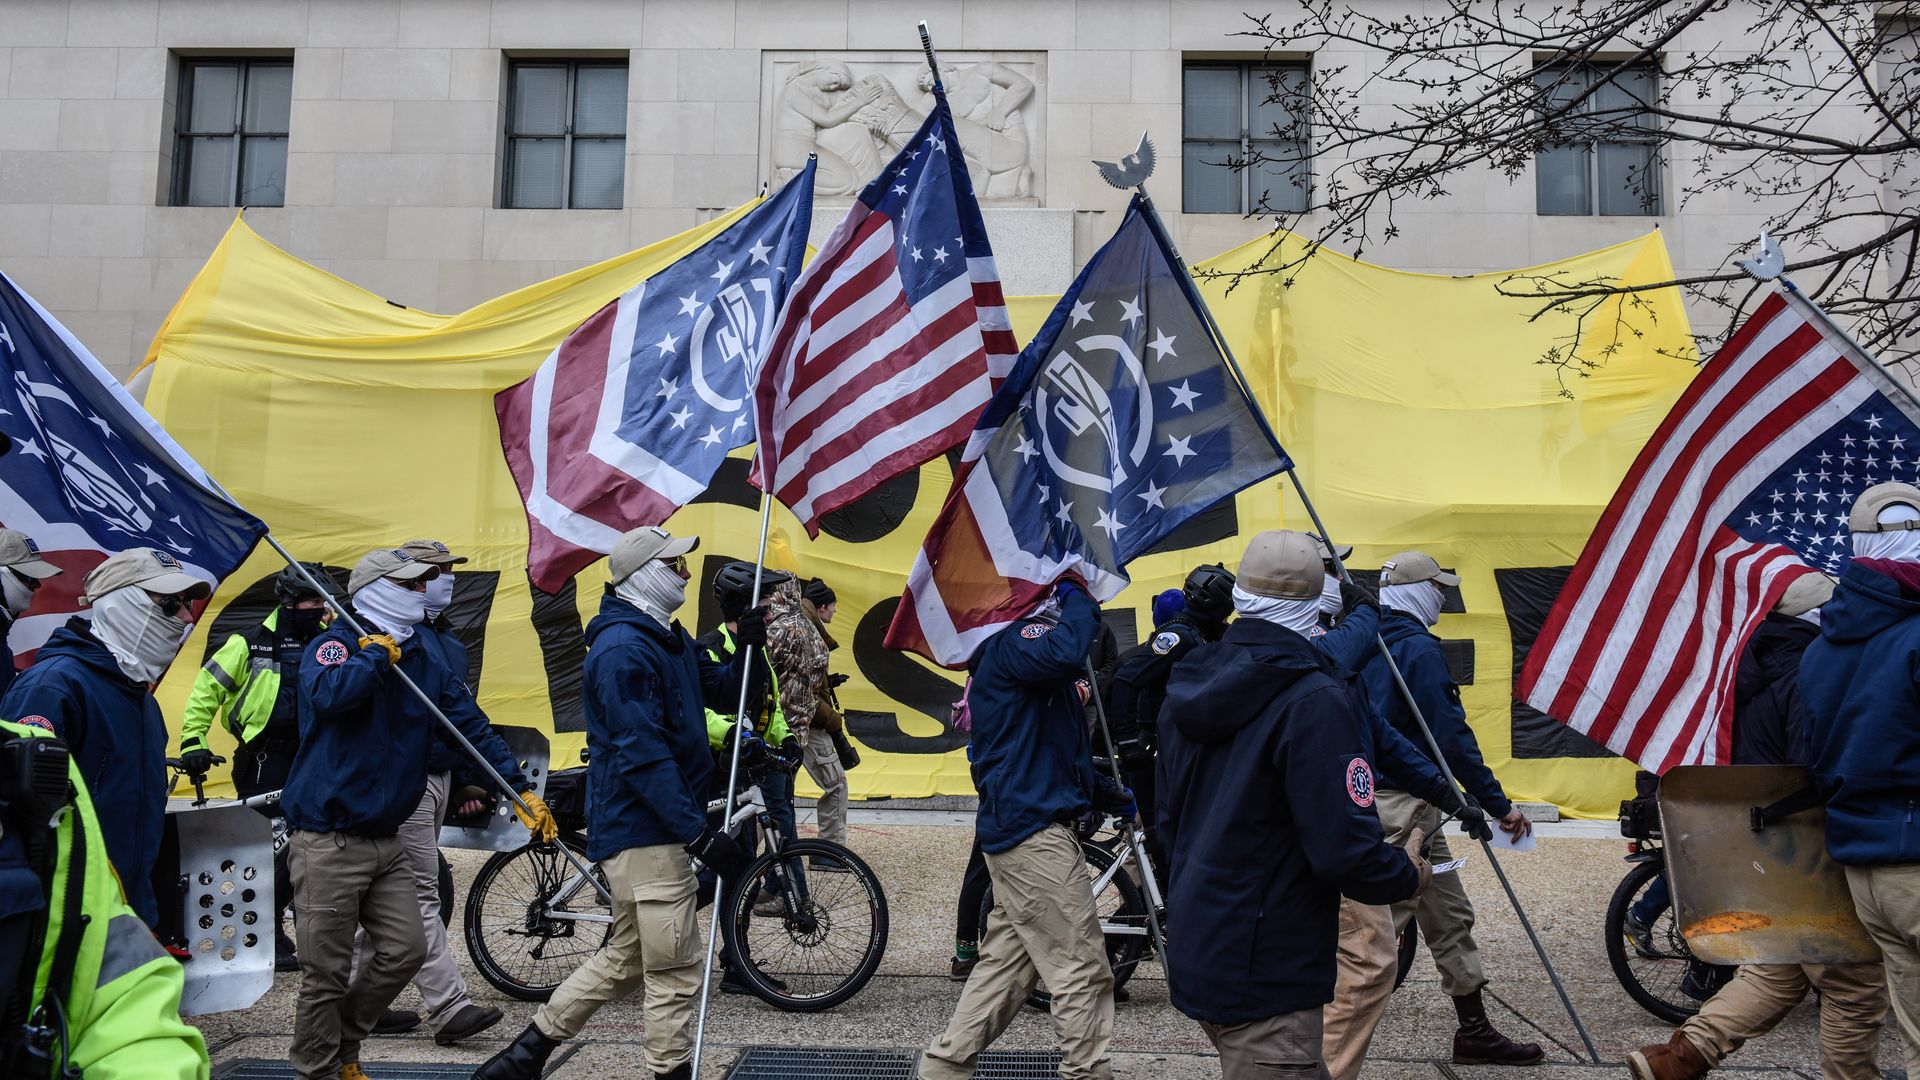 Members of Patriot Front hold flags 